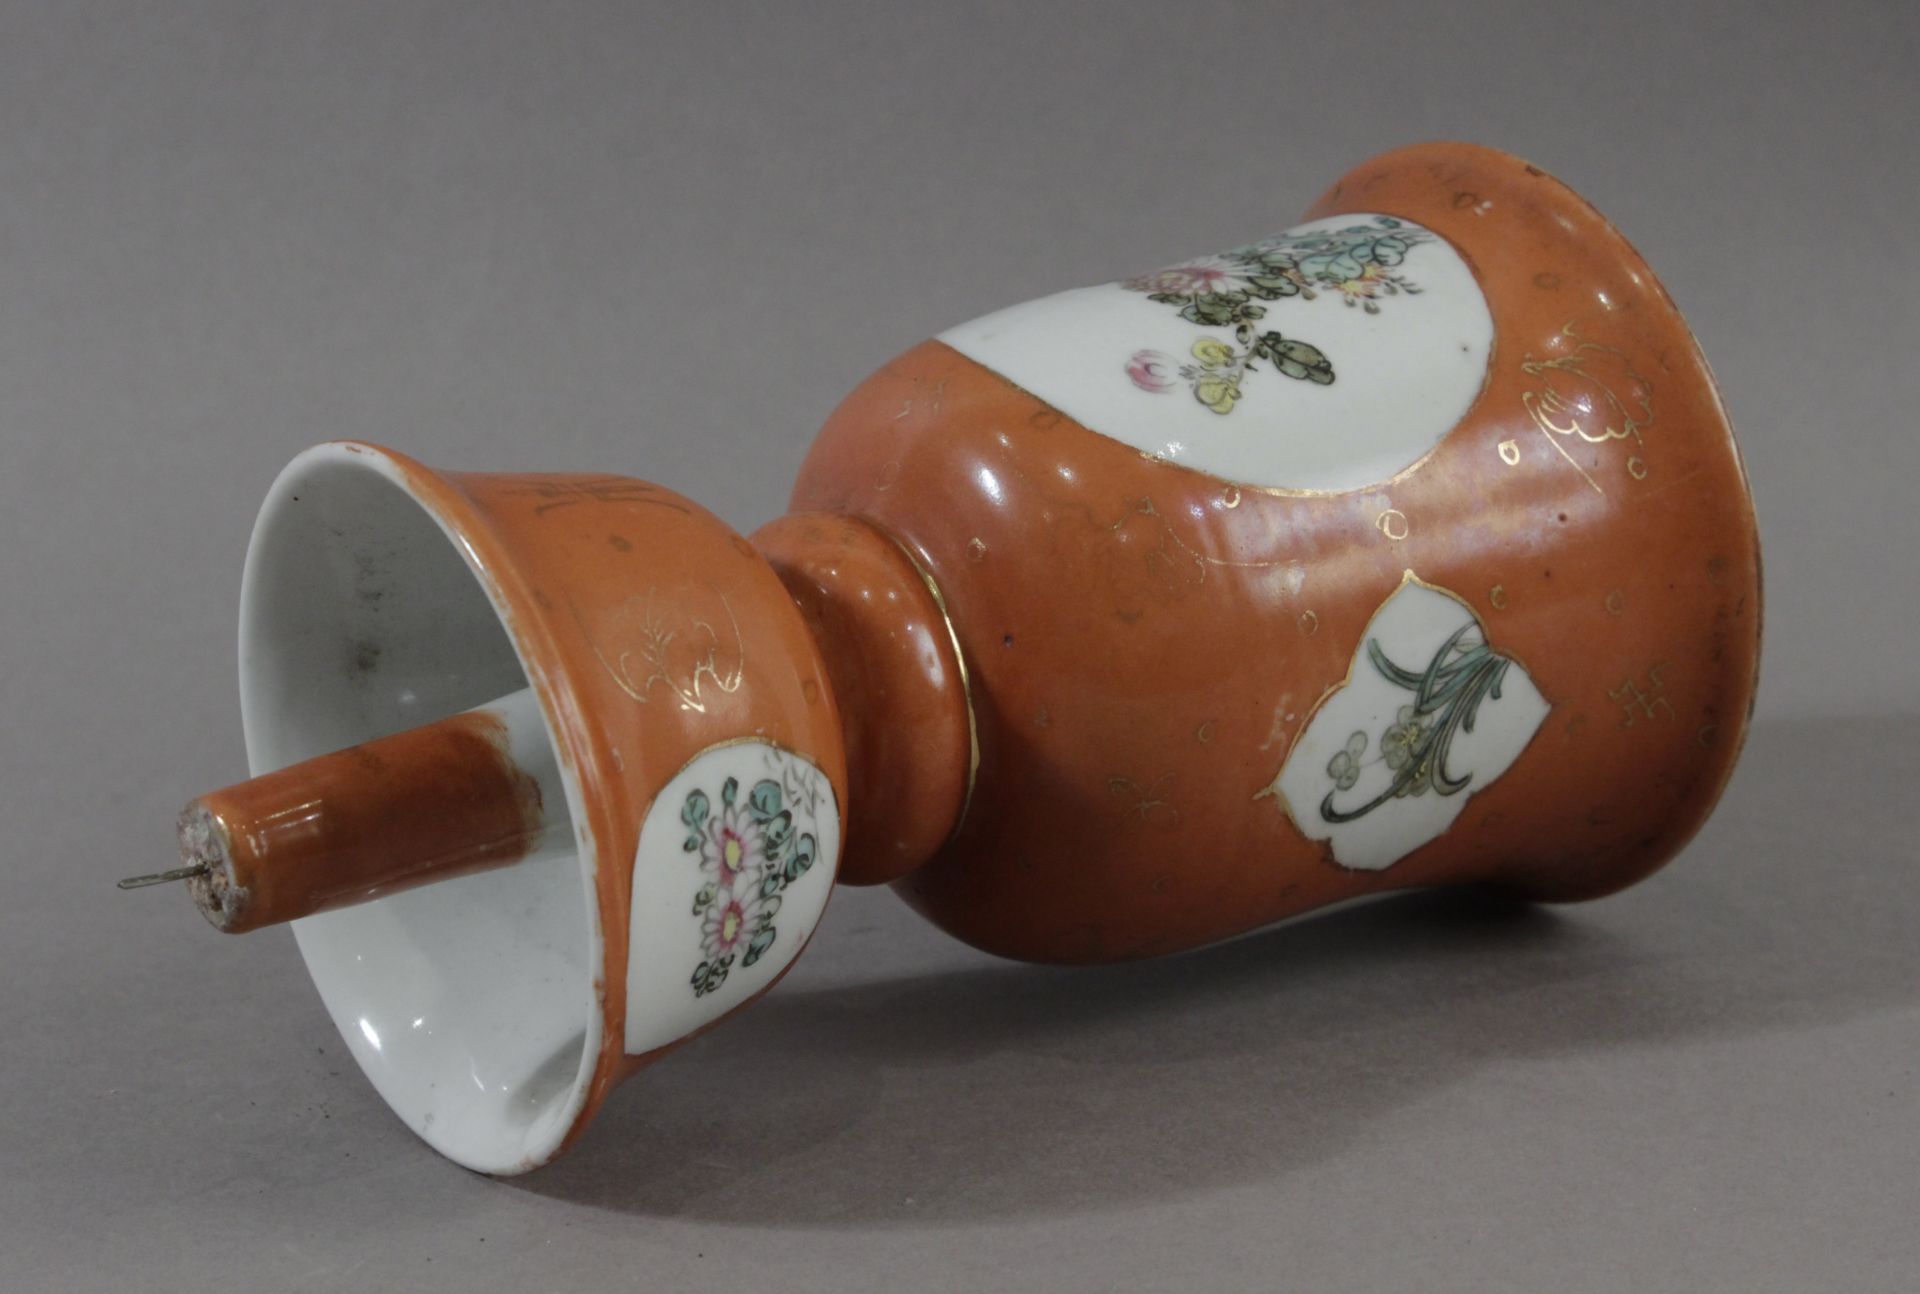 An early 20th century Chinese candle stick from Qing dynasty in Famille Rose porcelain - Image 7 of 8